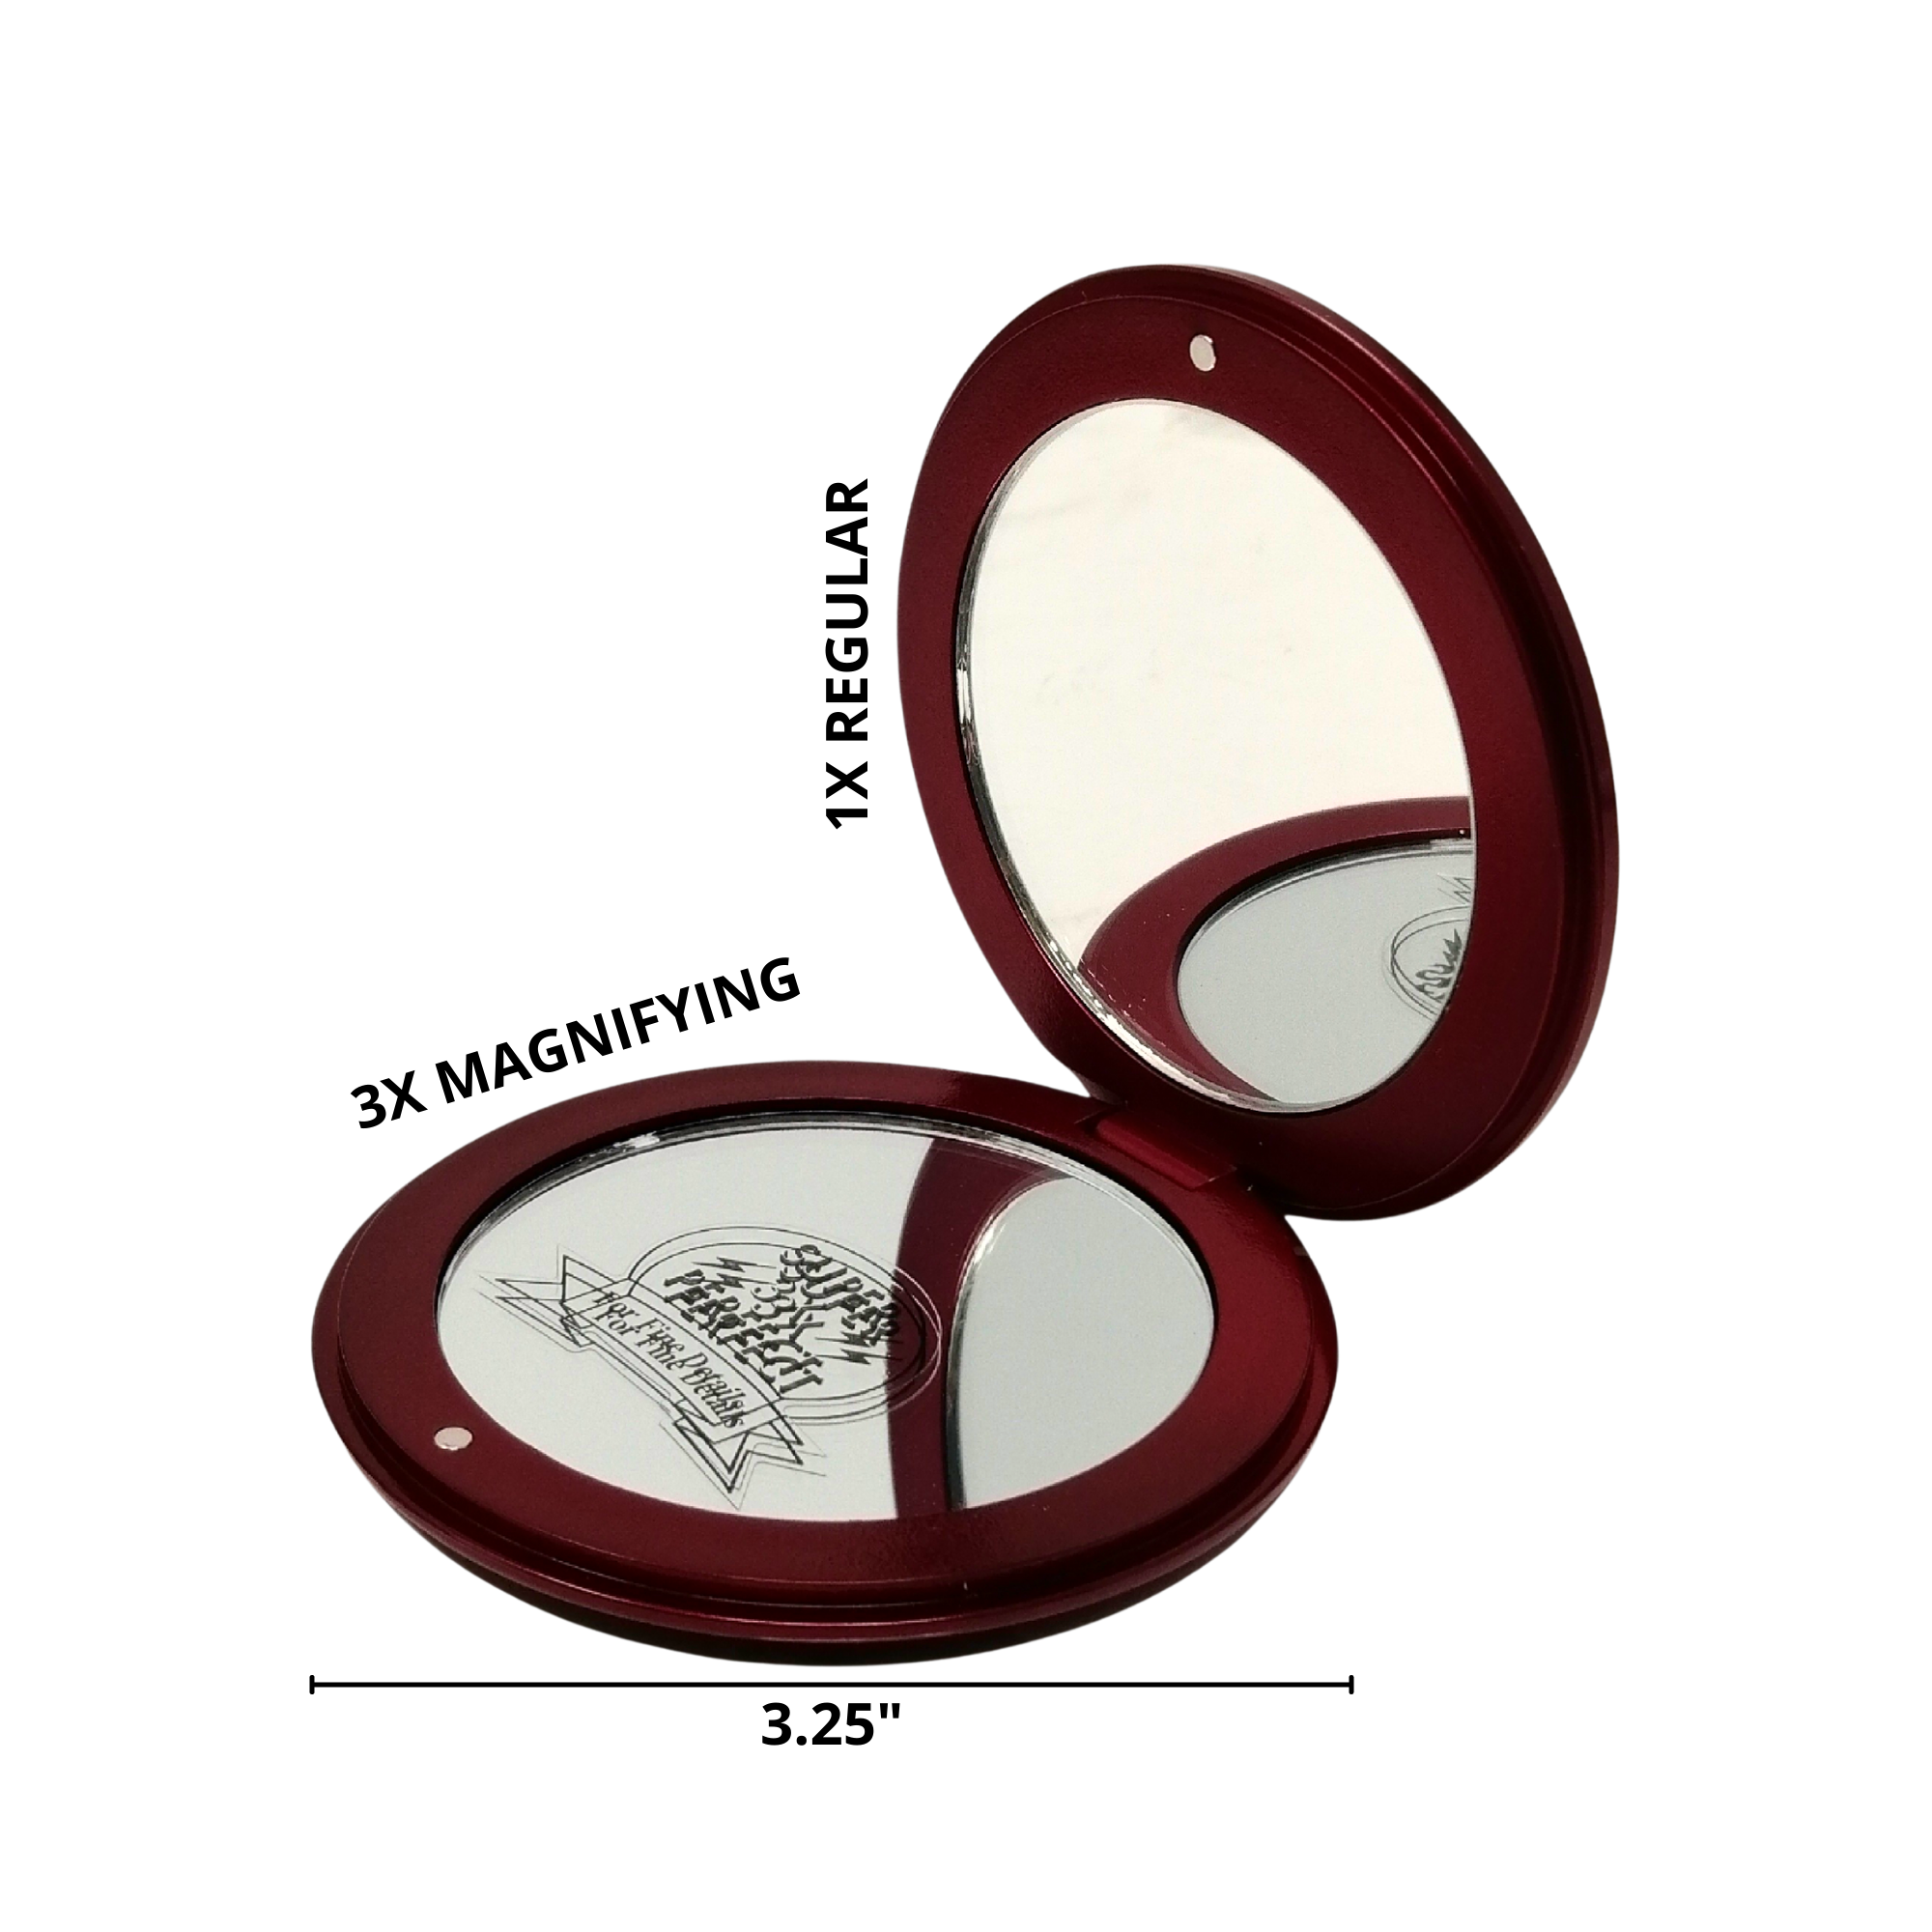 1X/3X Magnifying Double-Sided Red Swarovski Compact Mirror (CM307/R)